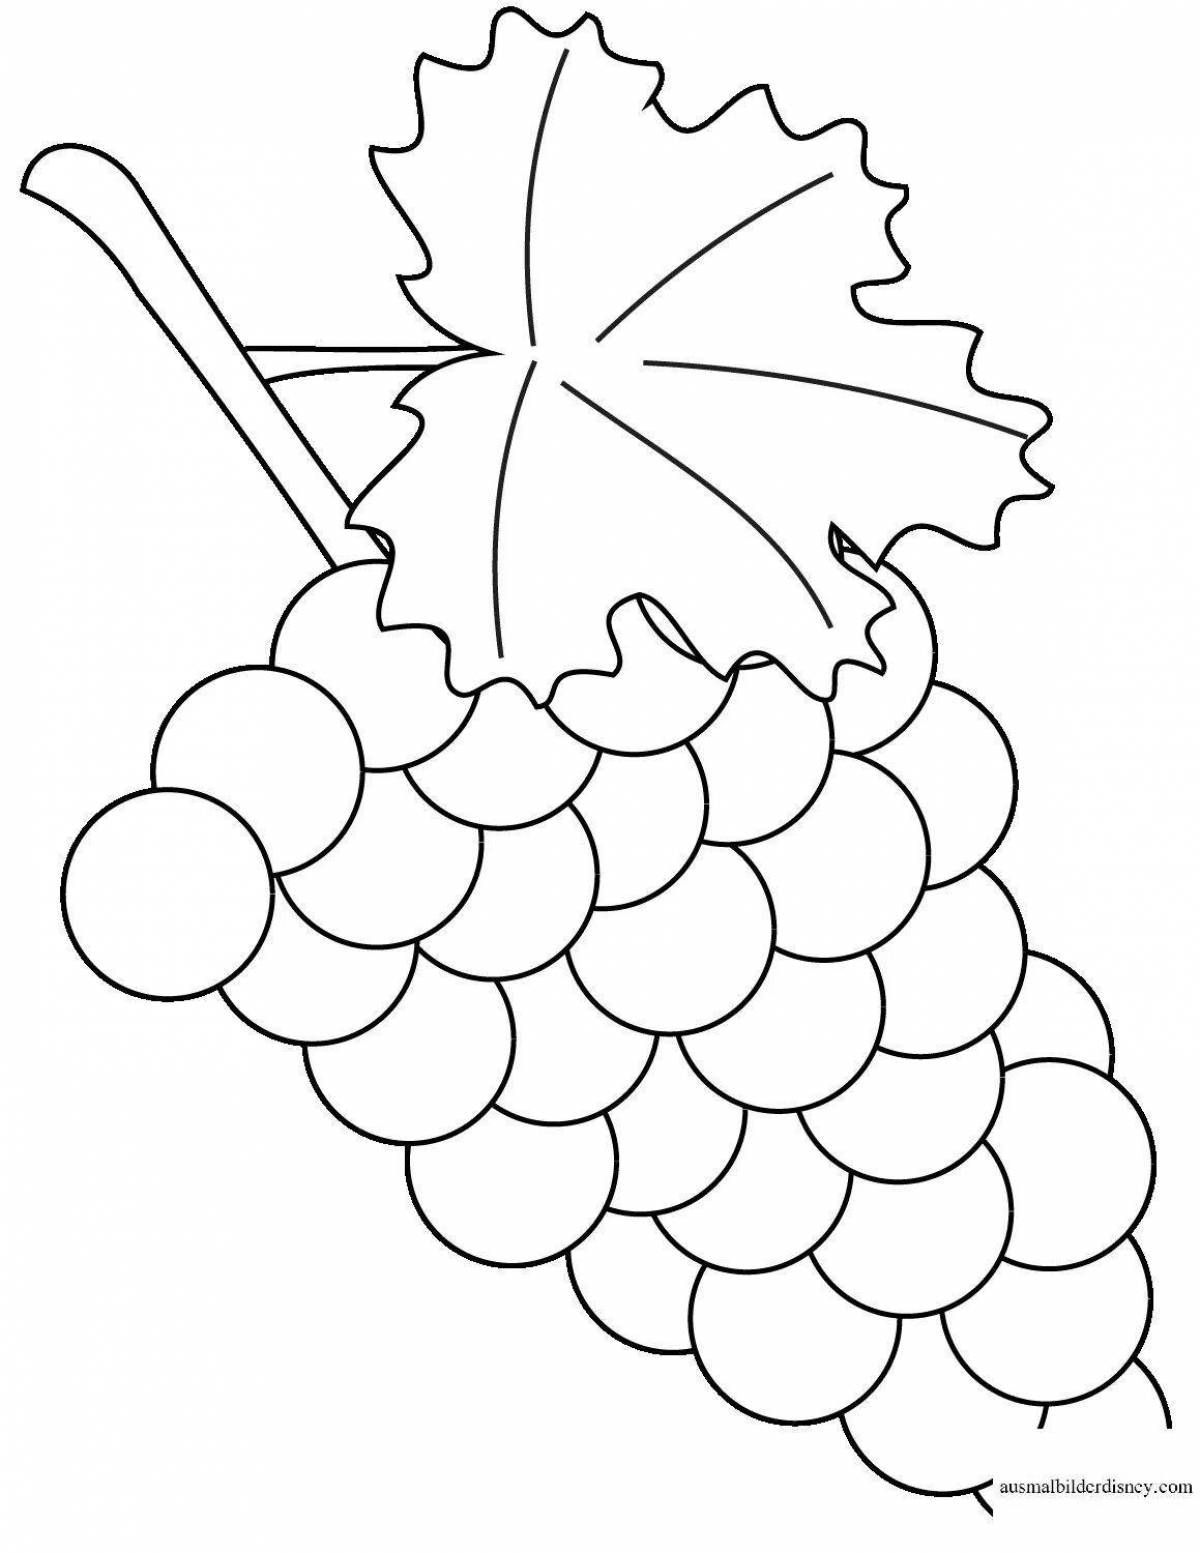 Sparkly grape coloring pages for kids